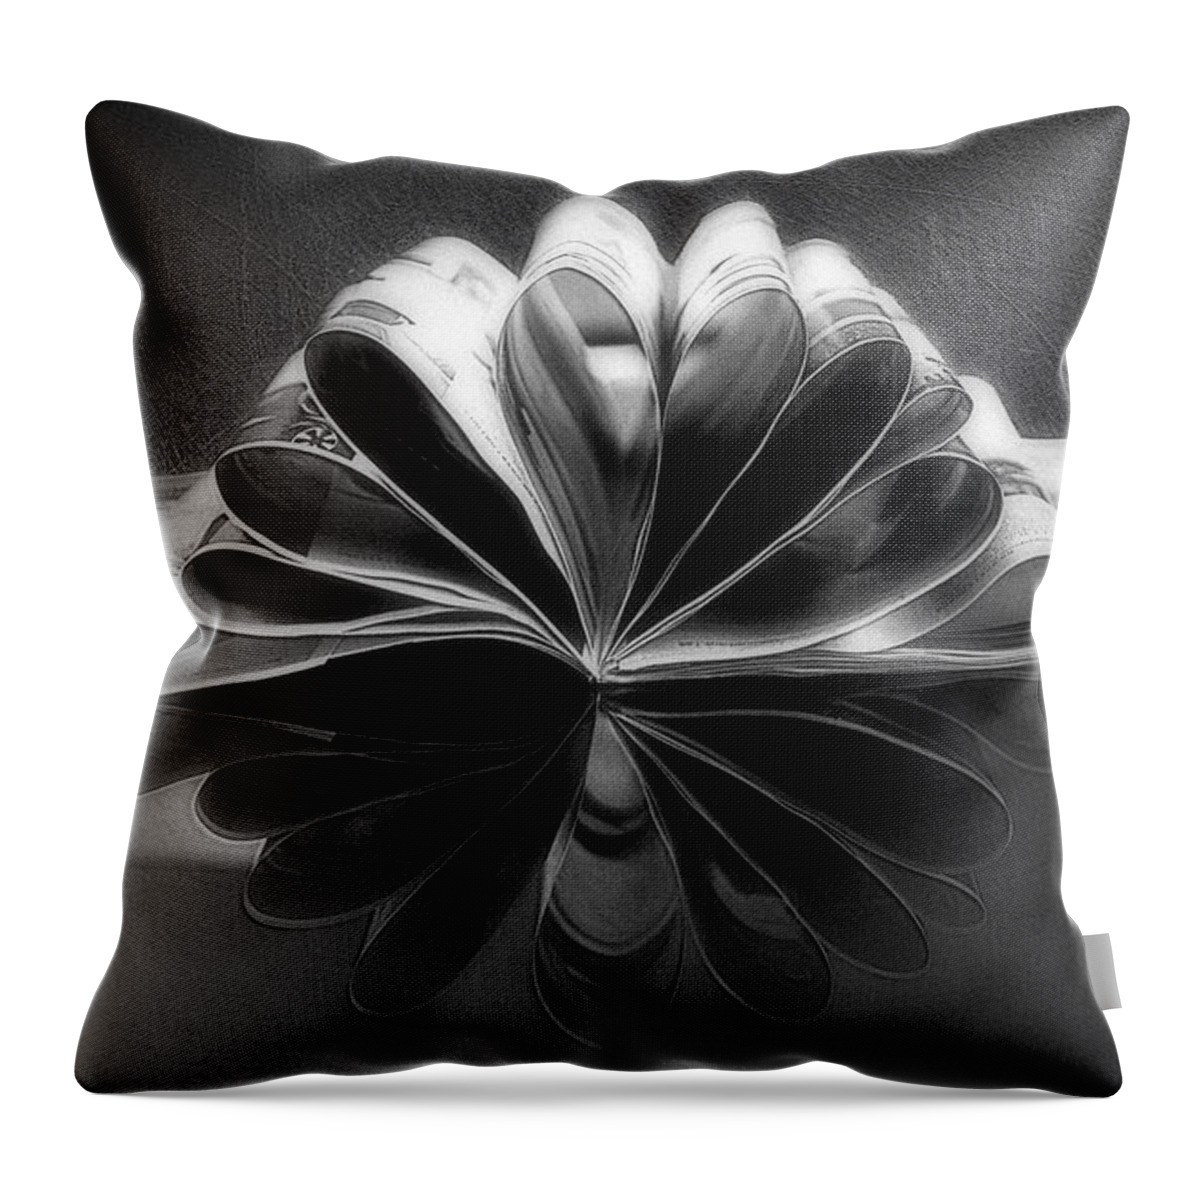 Semi Abstract Throw Pillow featuring the photograph This Is The Way These Pages Roll by Rene Crystal